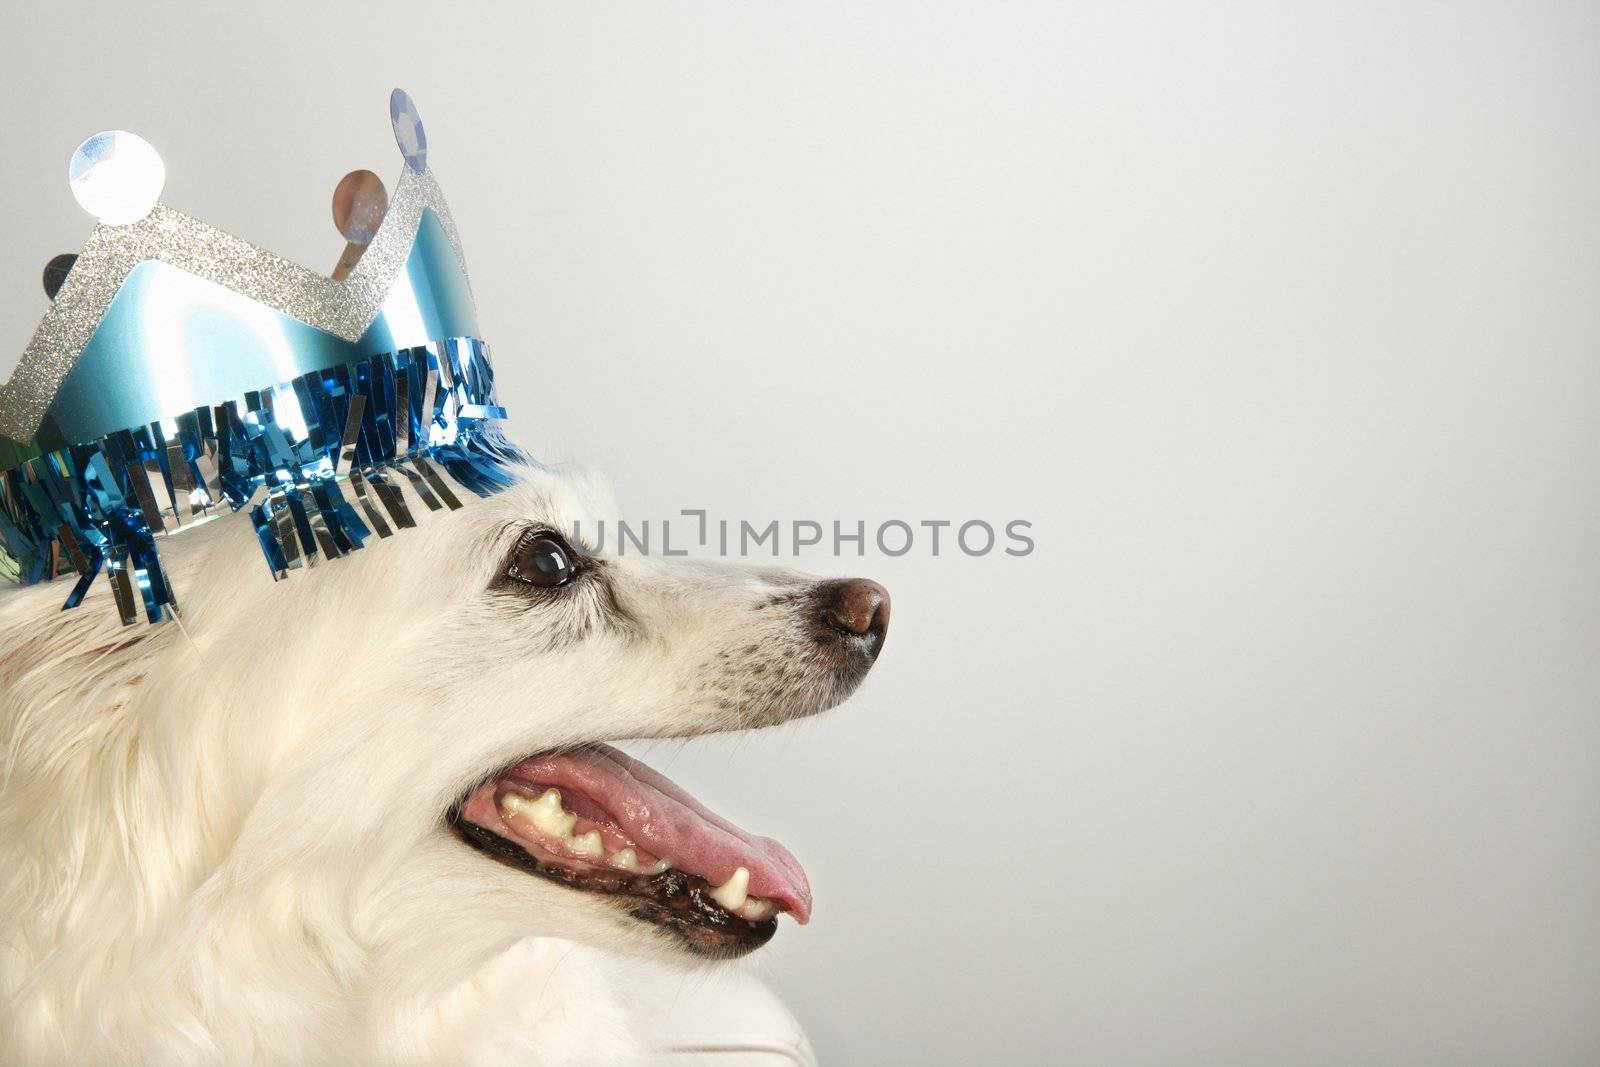 Profile of fluffy white dog wearing paper crown.